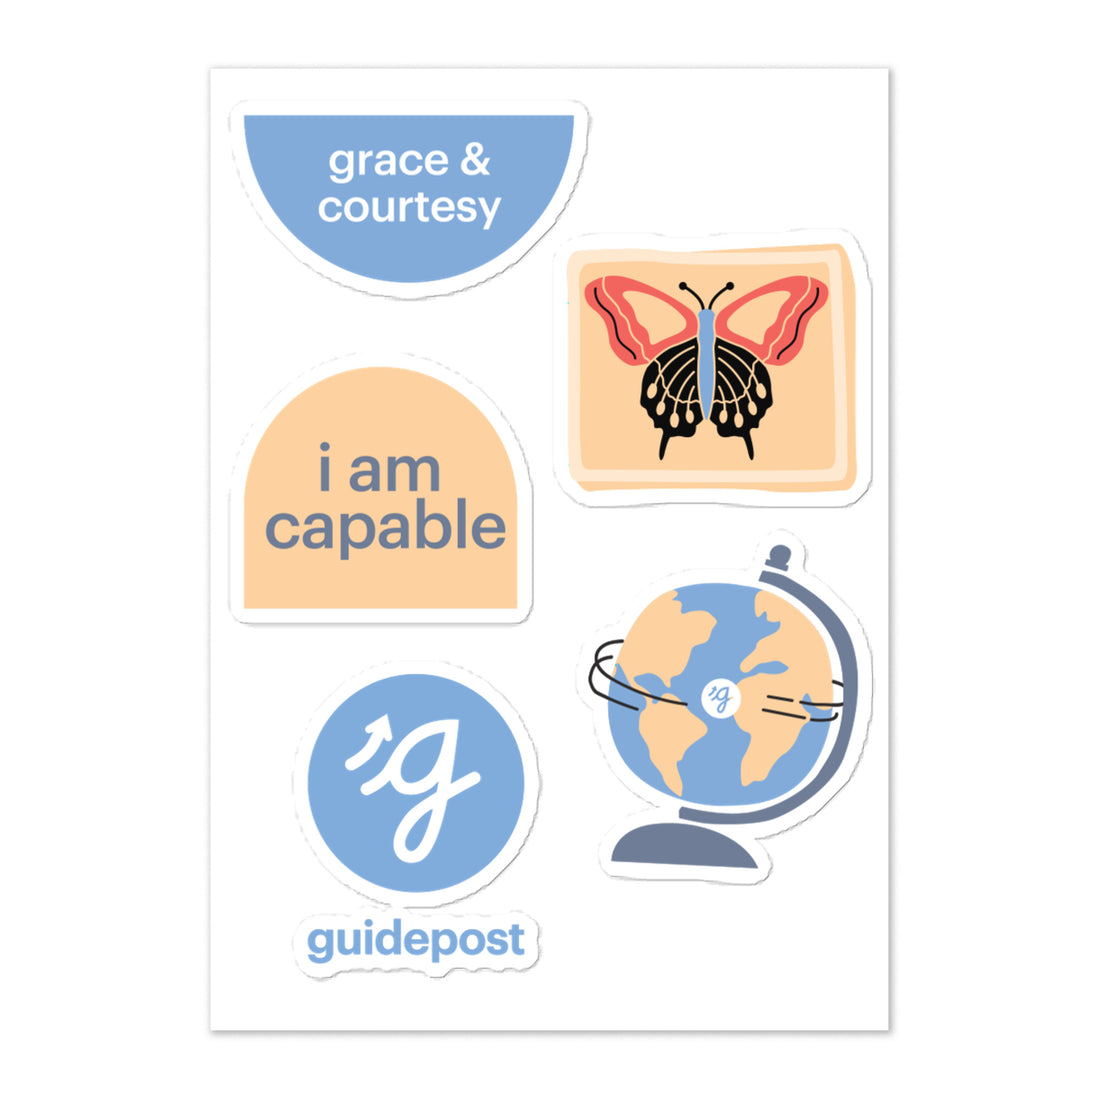 Guidepost Promo - I am capable Sticker sheet